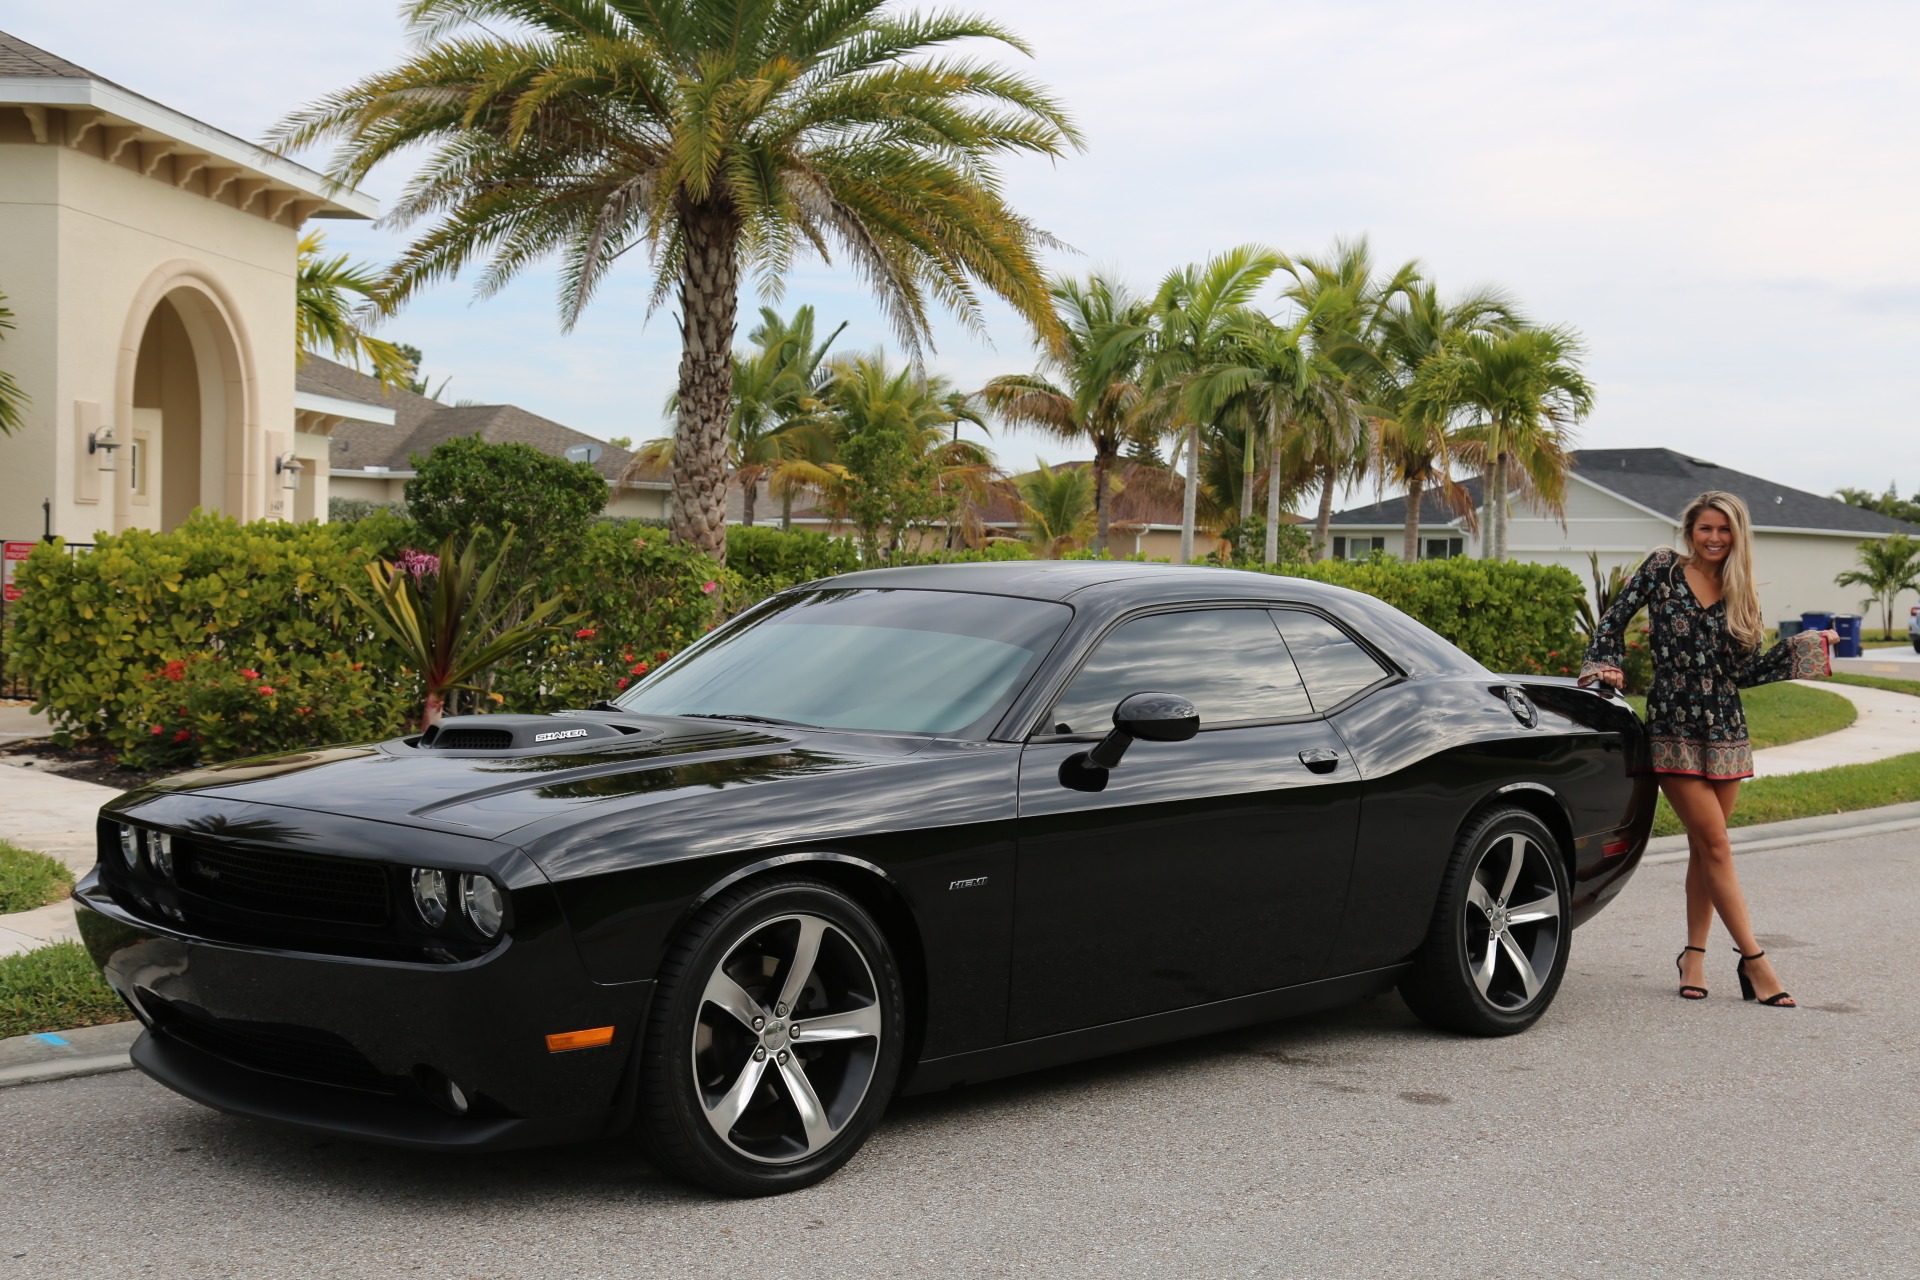 Used 2014 Dodge Challenger R/T Shaker Package For Sale ($28,000) | Muscle  Cars for Sale Inc. Stock #2101